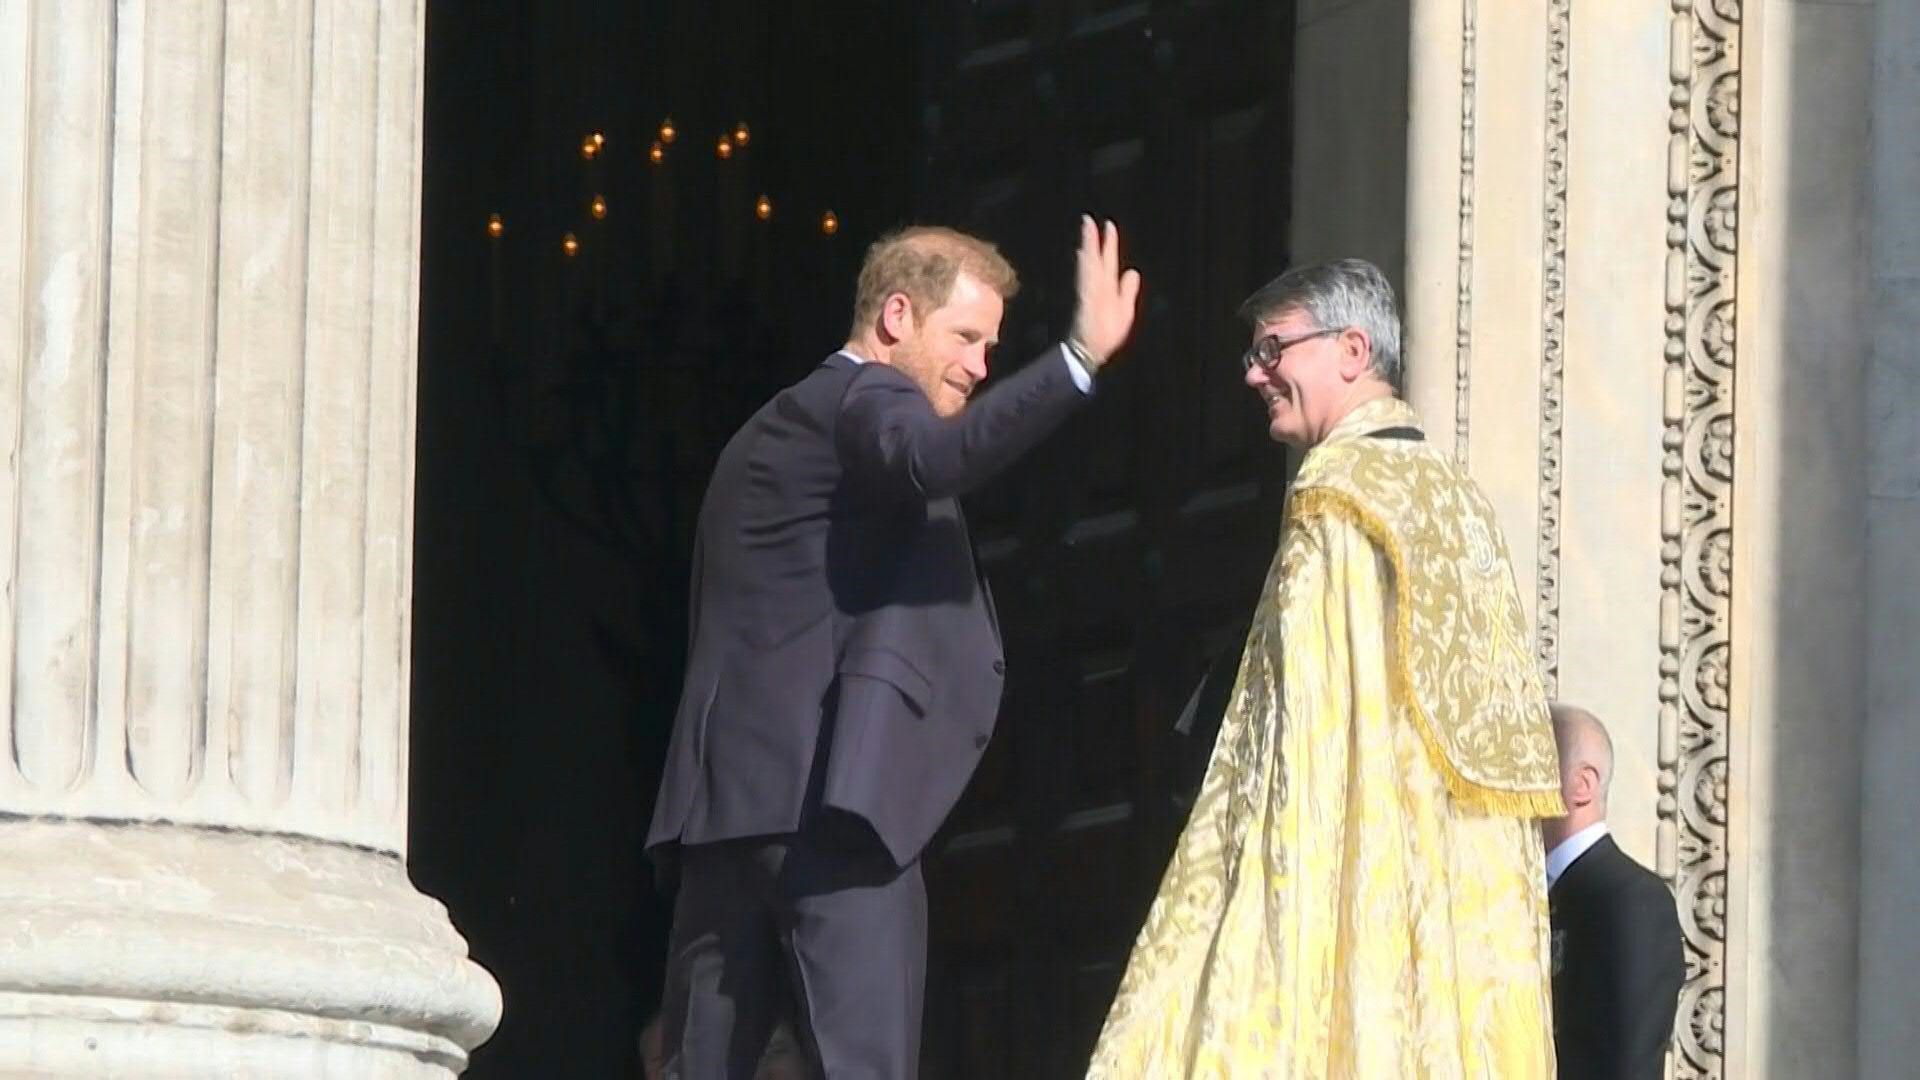 Prince Harry arrives at Invictus Games' 10th anniversary ceremony